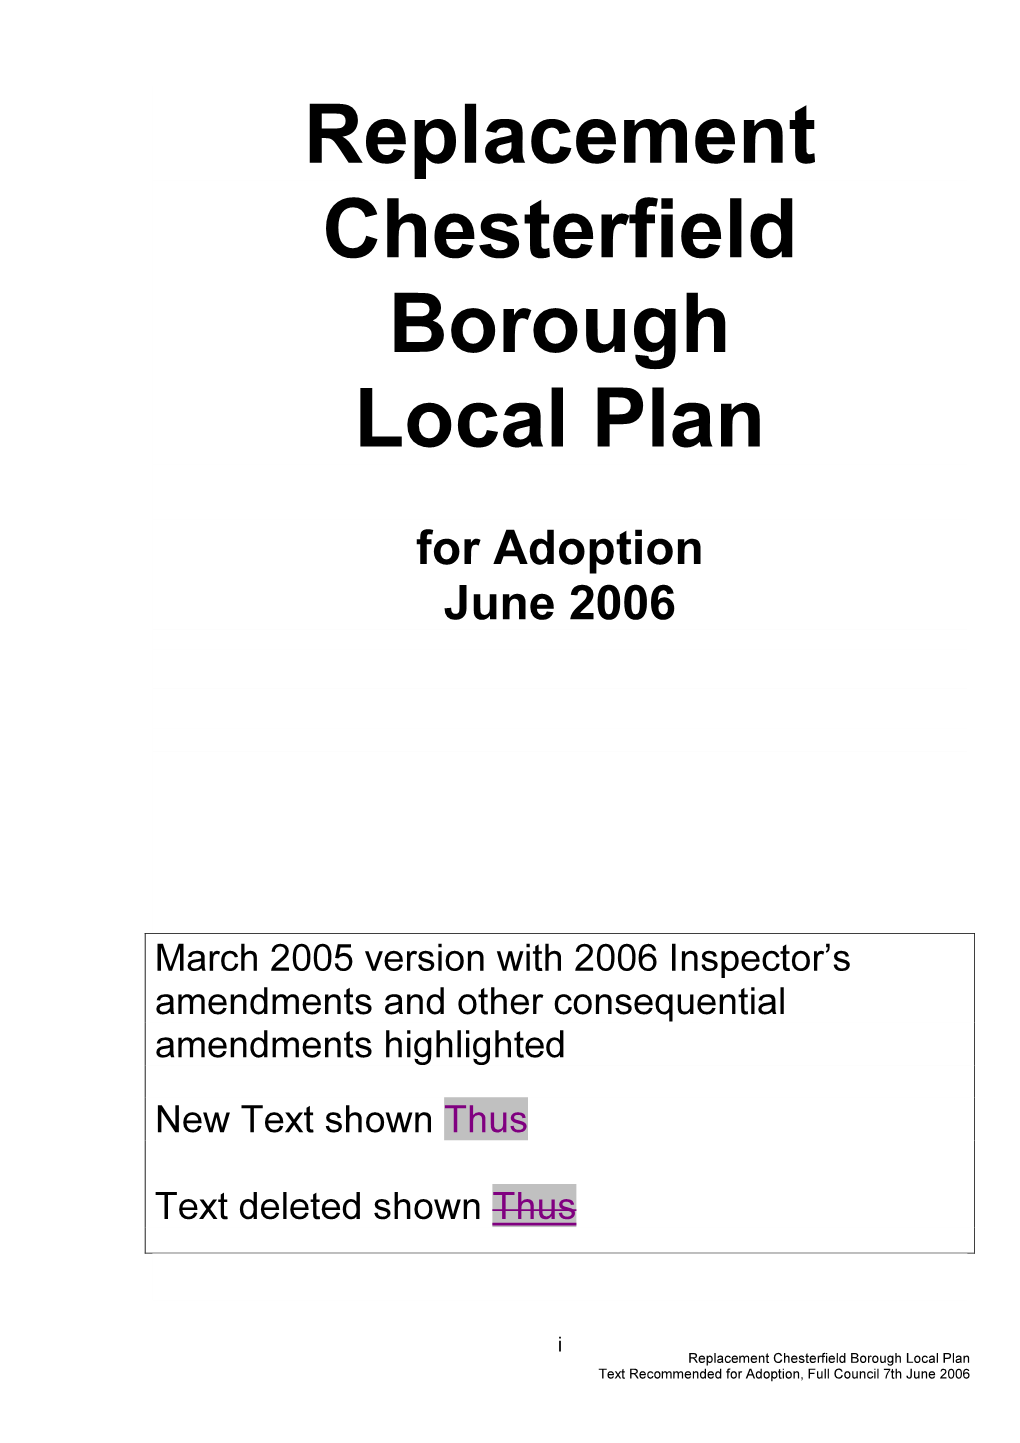 Replacement Chesterfield Borough Local Plan